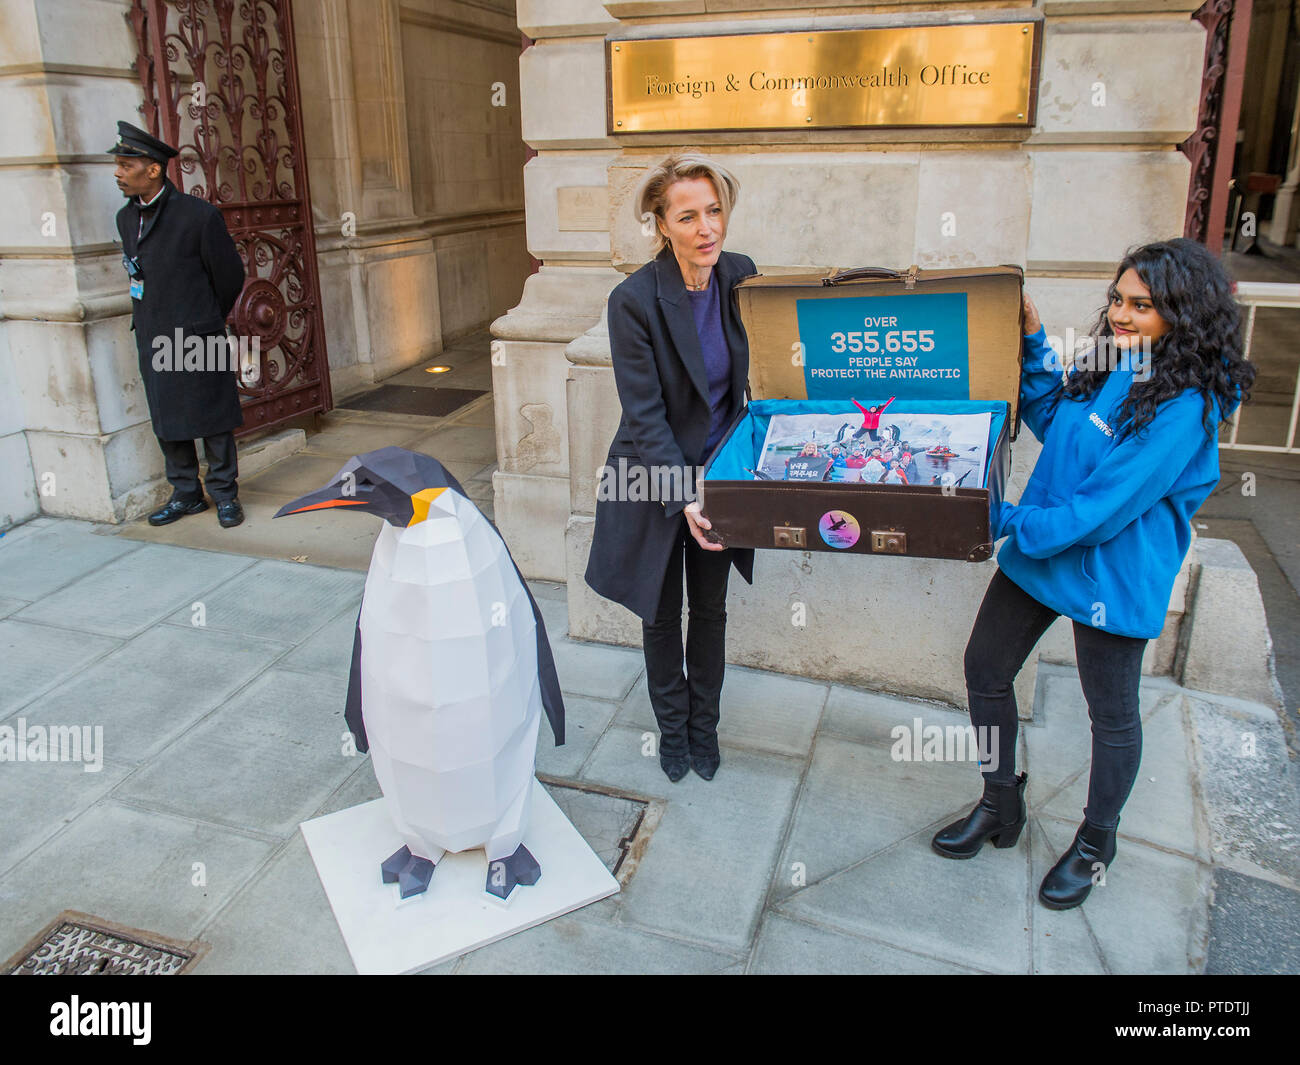 London, UK. 9th October, 2018. Gillian Anderson (pictured) arrives with the 350k signature petition in a well-travelled suitcase - as a Greenpeace Antarctic Ambassador she visits the Foreign & Commonwealth Office to deliver a petition calling for the creation of the largest protected area on Earth – a 1.8 million square kilometre Antarctic Ocean Sanctuary. Credit: Guy Bell/Alamy Live News Stock Photo